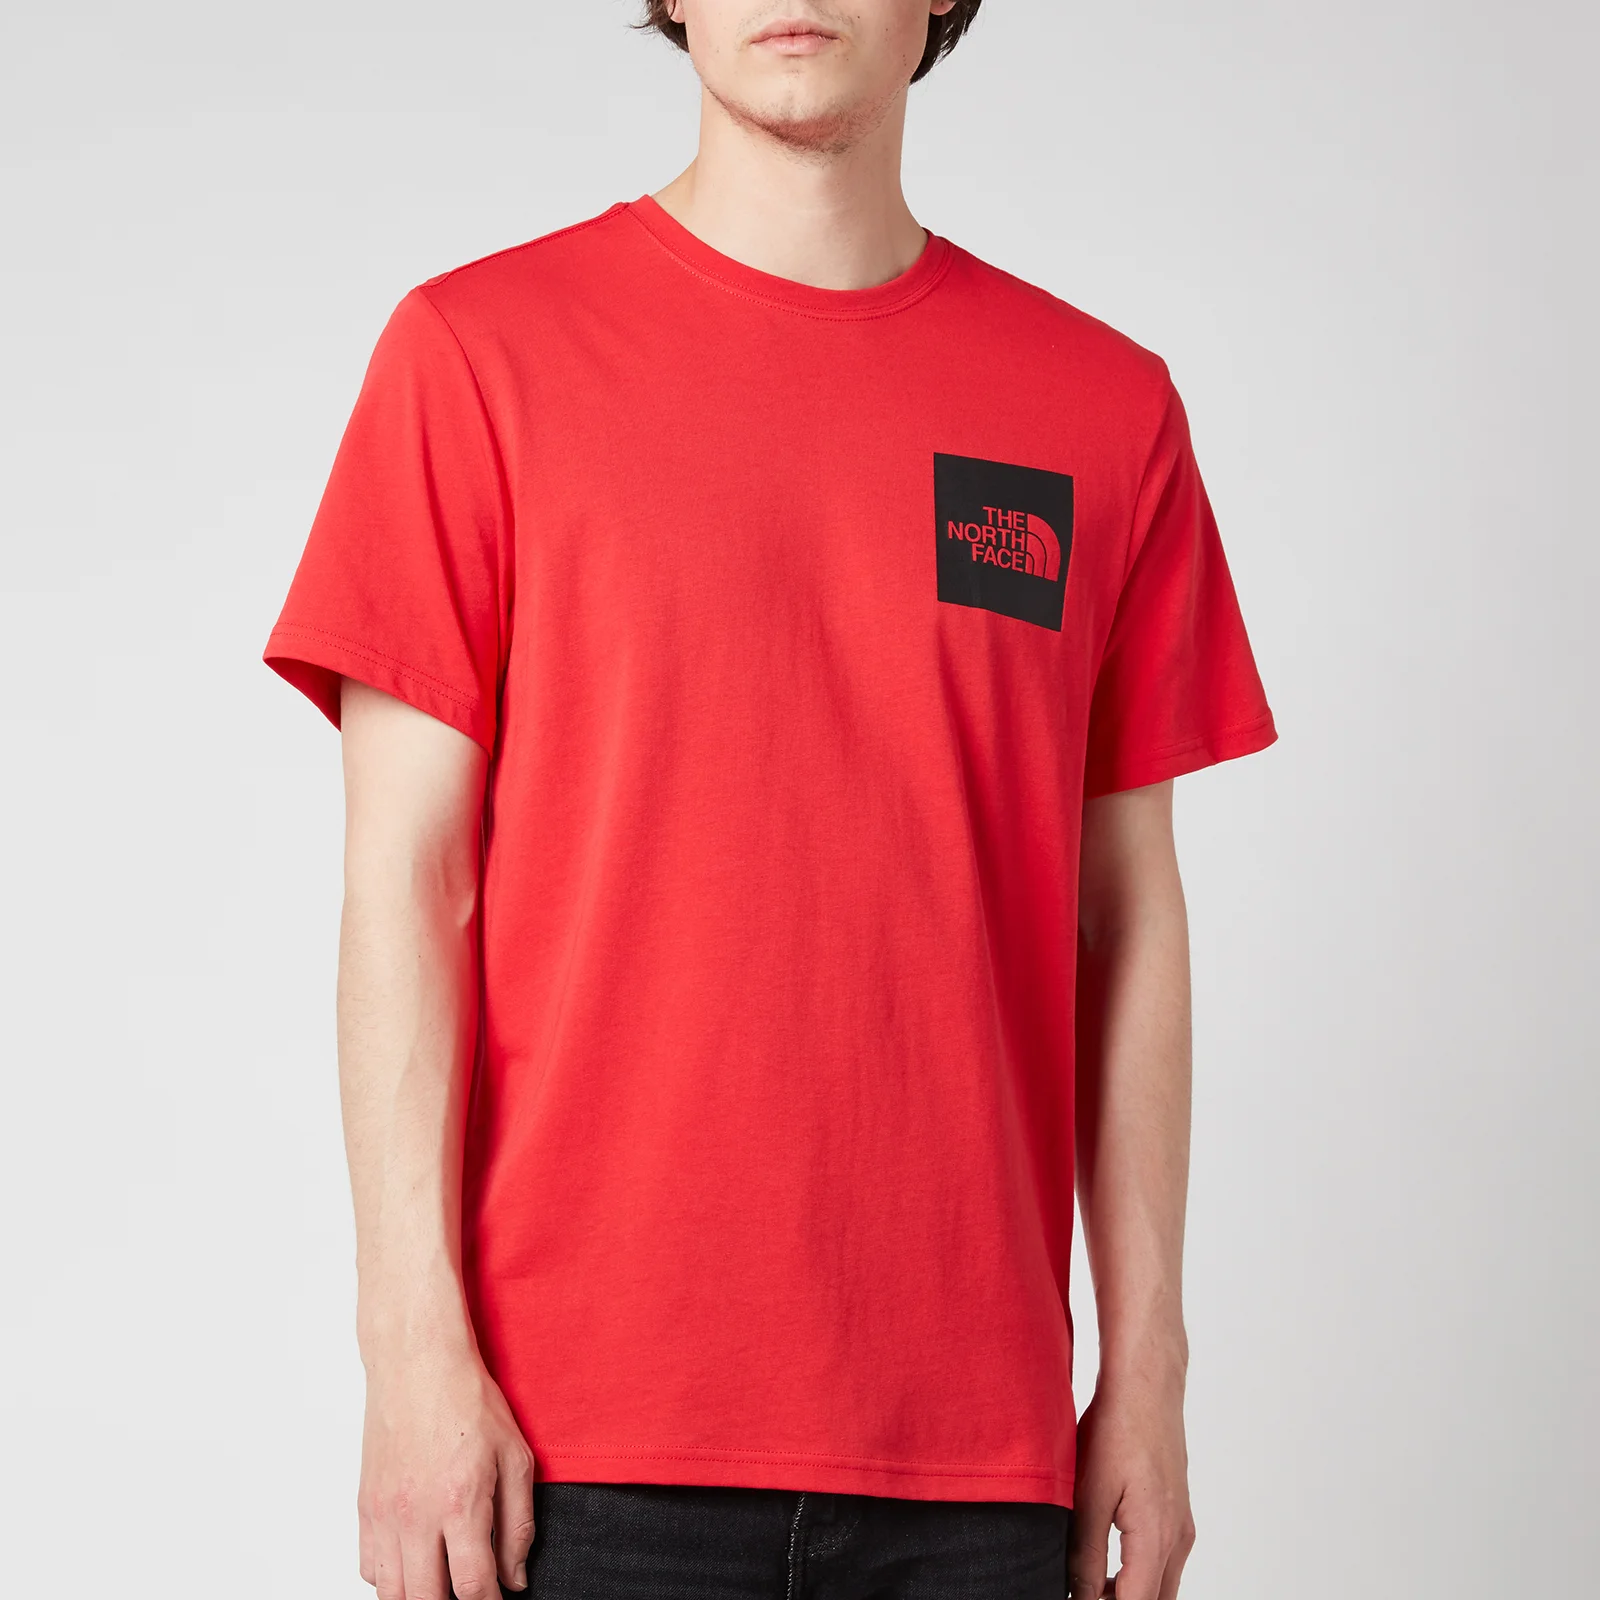 The North Face Men's Fine Short Sleeve T-Shirt - Horizon Red Image 1